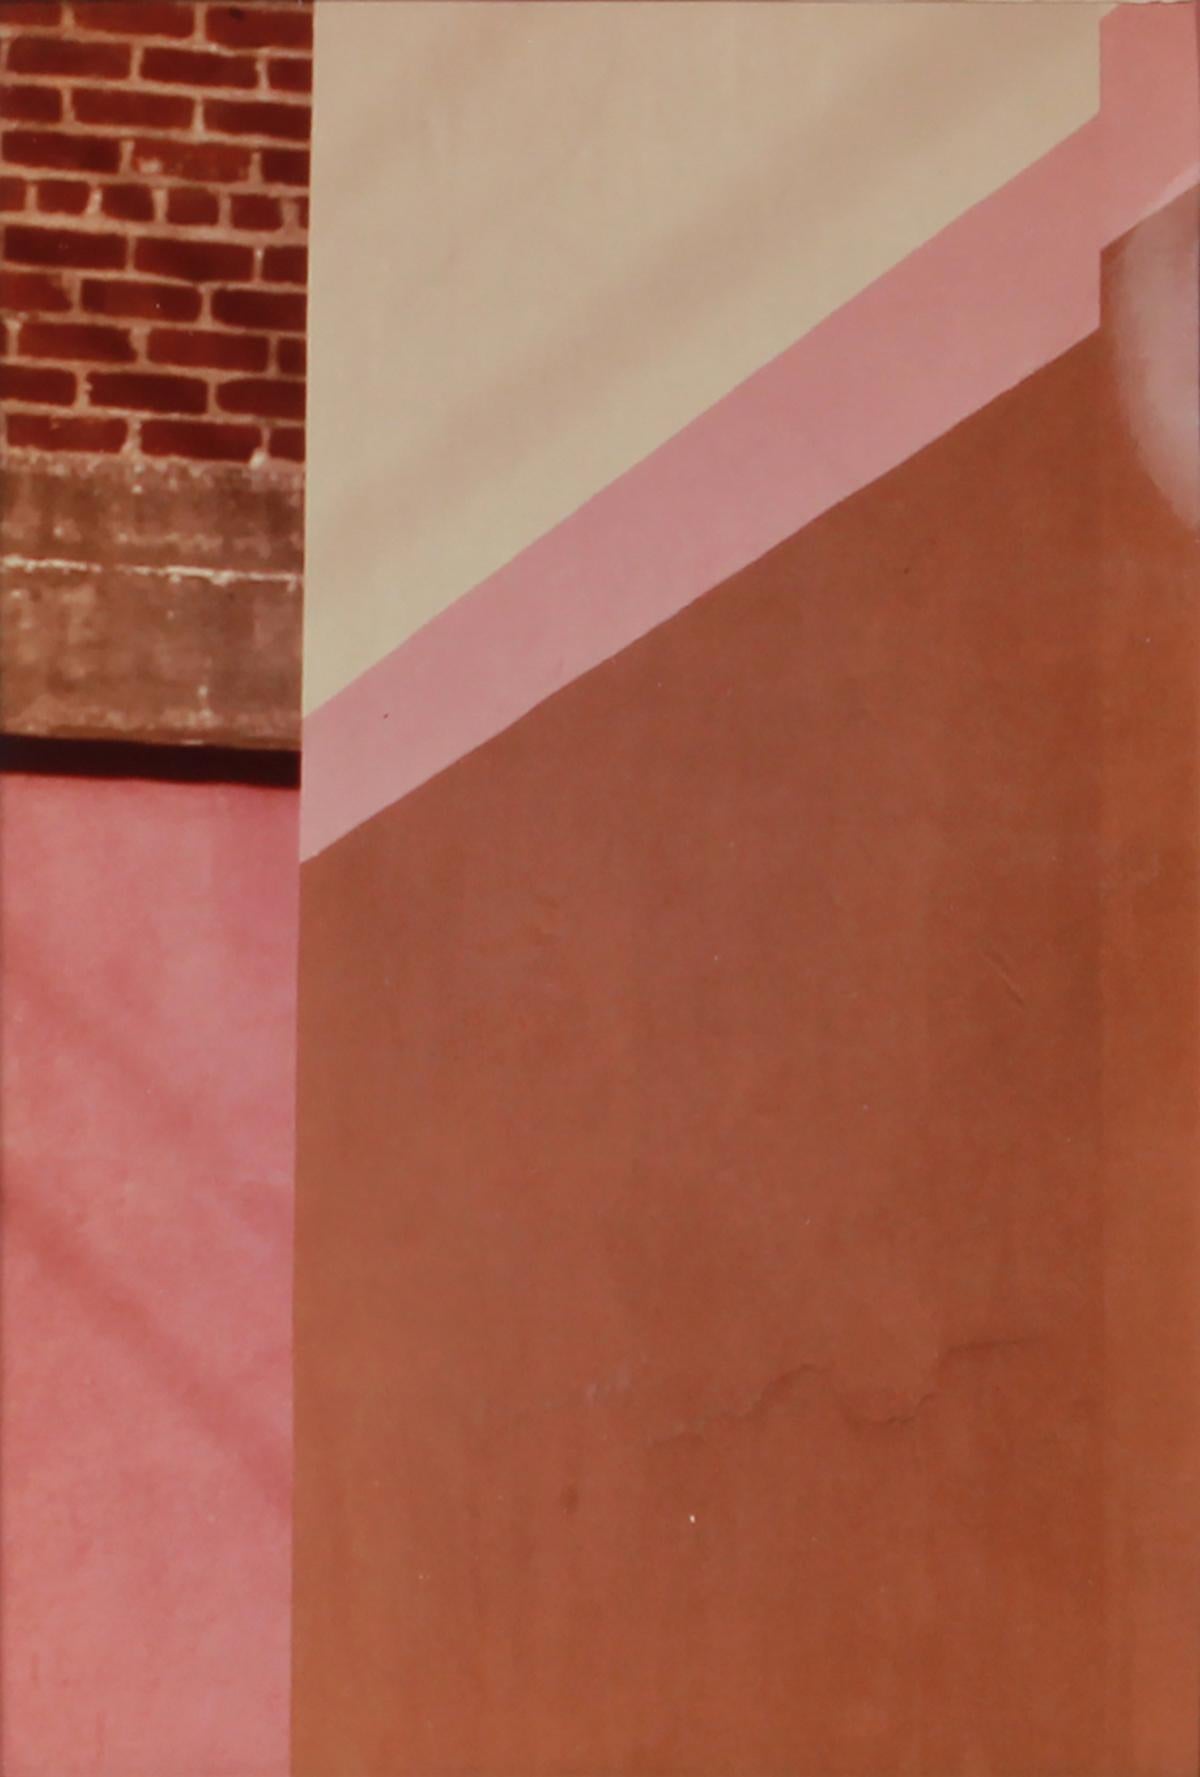 This 1970's color photograph diptych of a pink and brick San Francisco wall entitled 